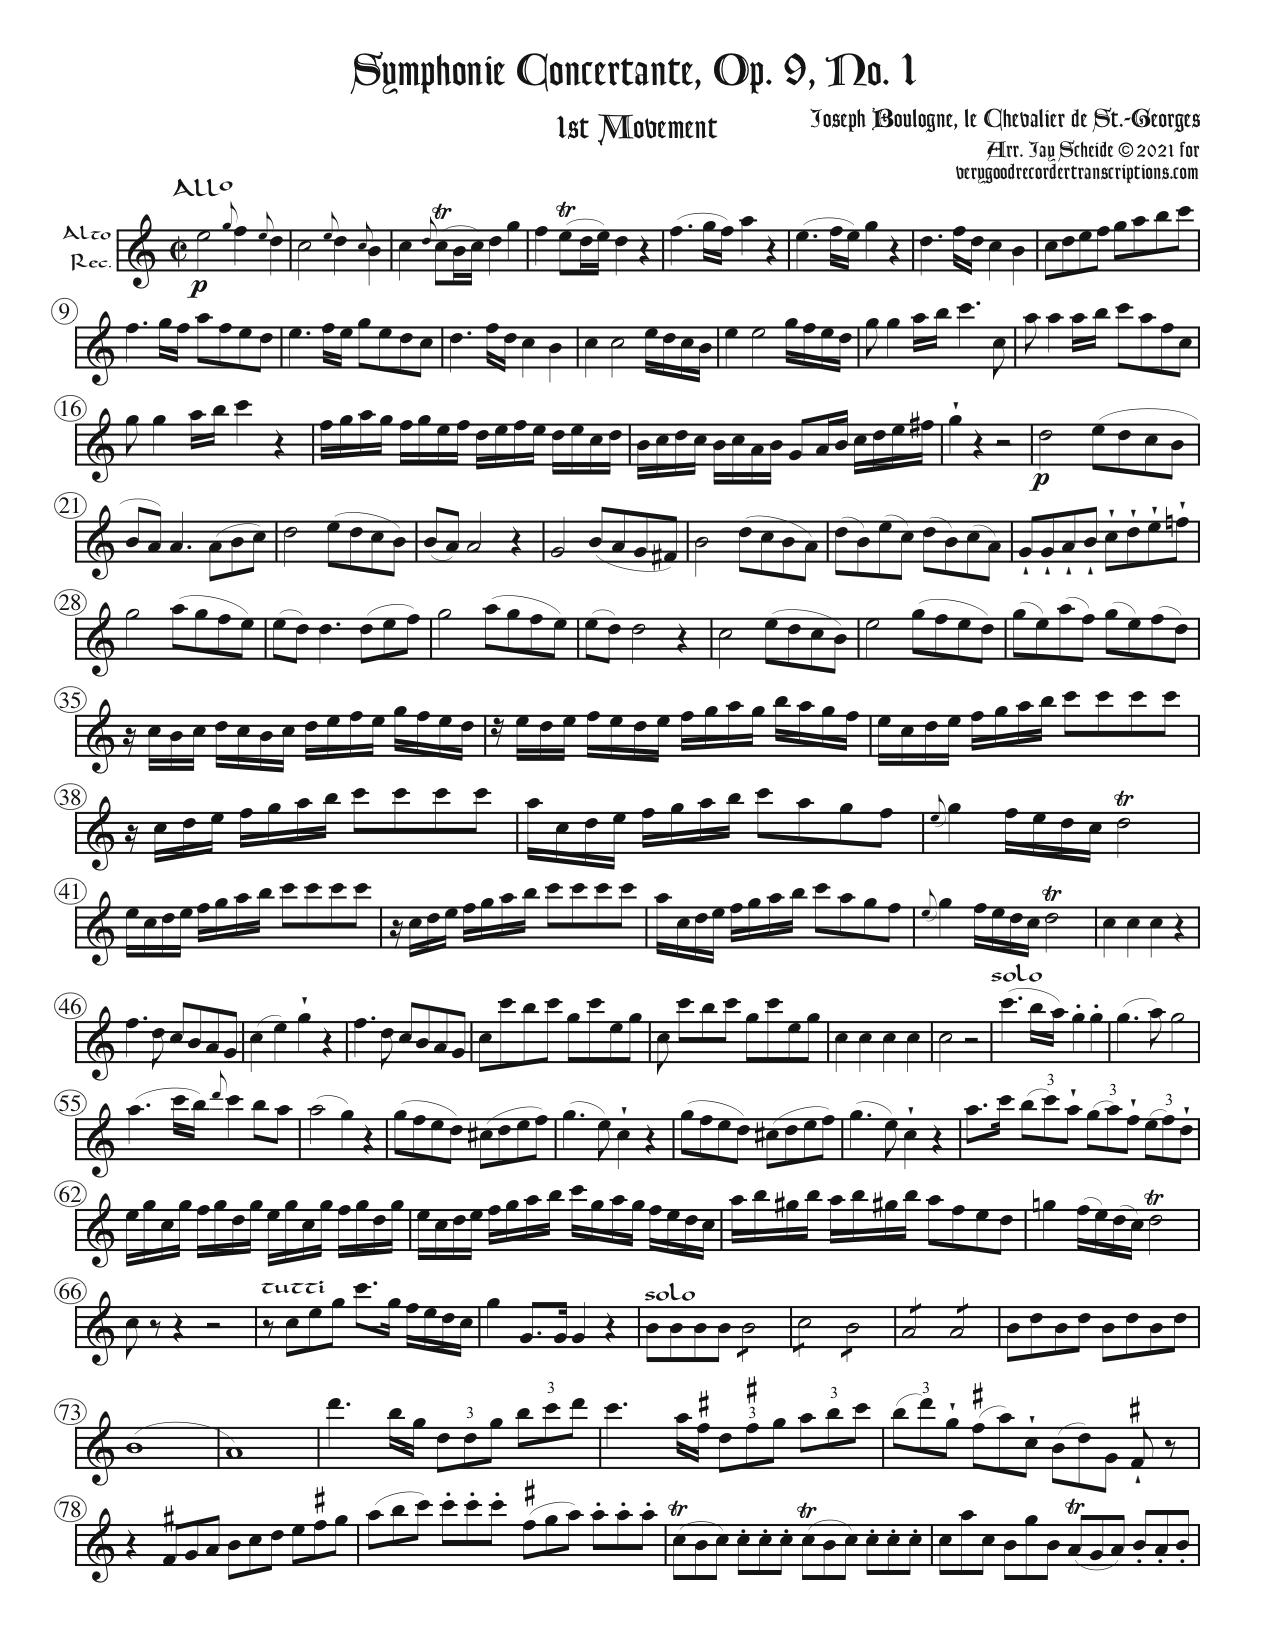 Recorder parts for Four Symphonies Concertantes, one Symphony & one Overture